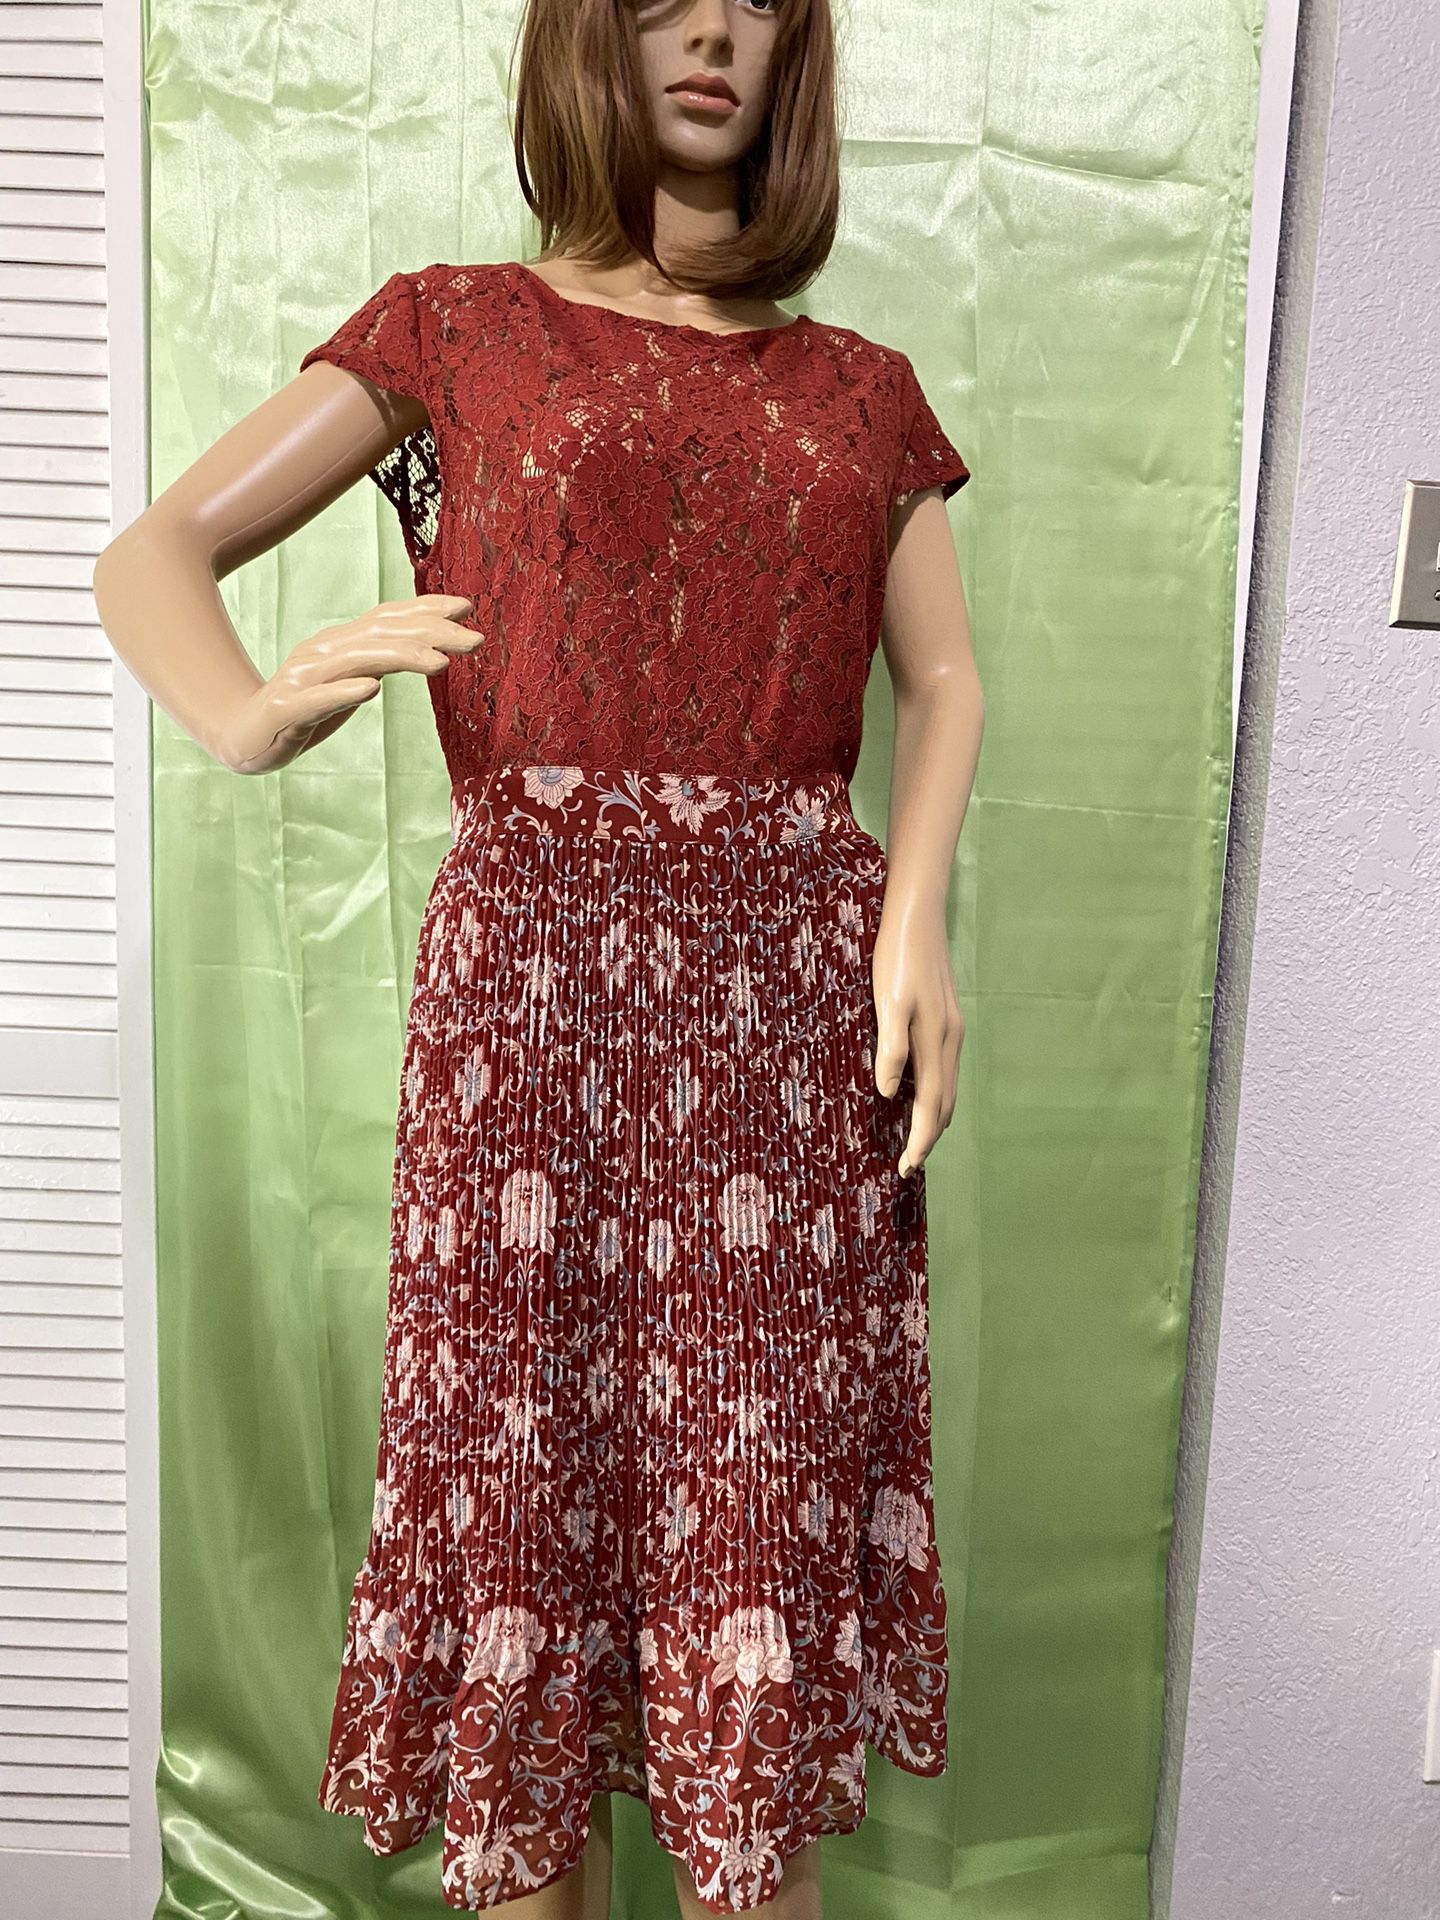 Brick Color TR Designs Lace And Pleated Dress. Size Medium